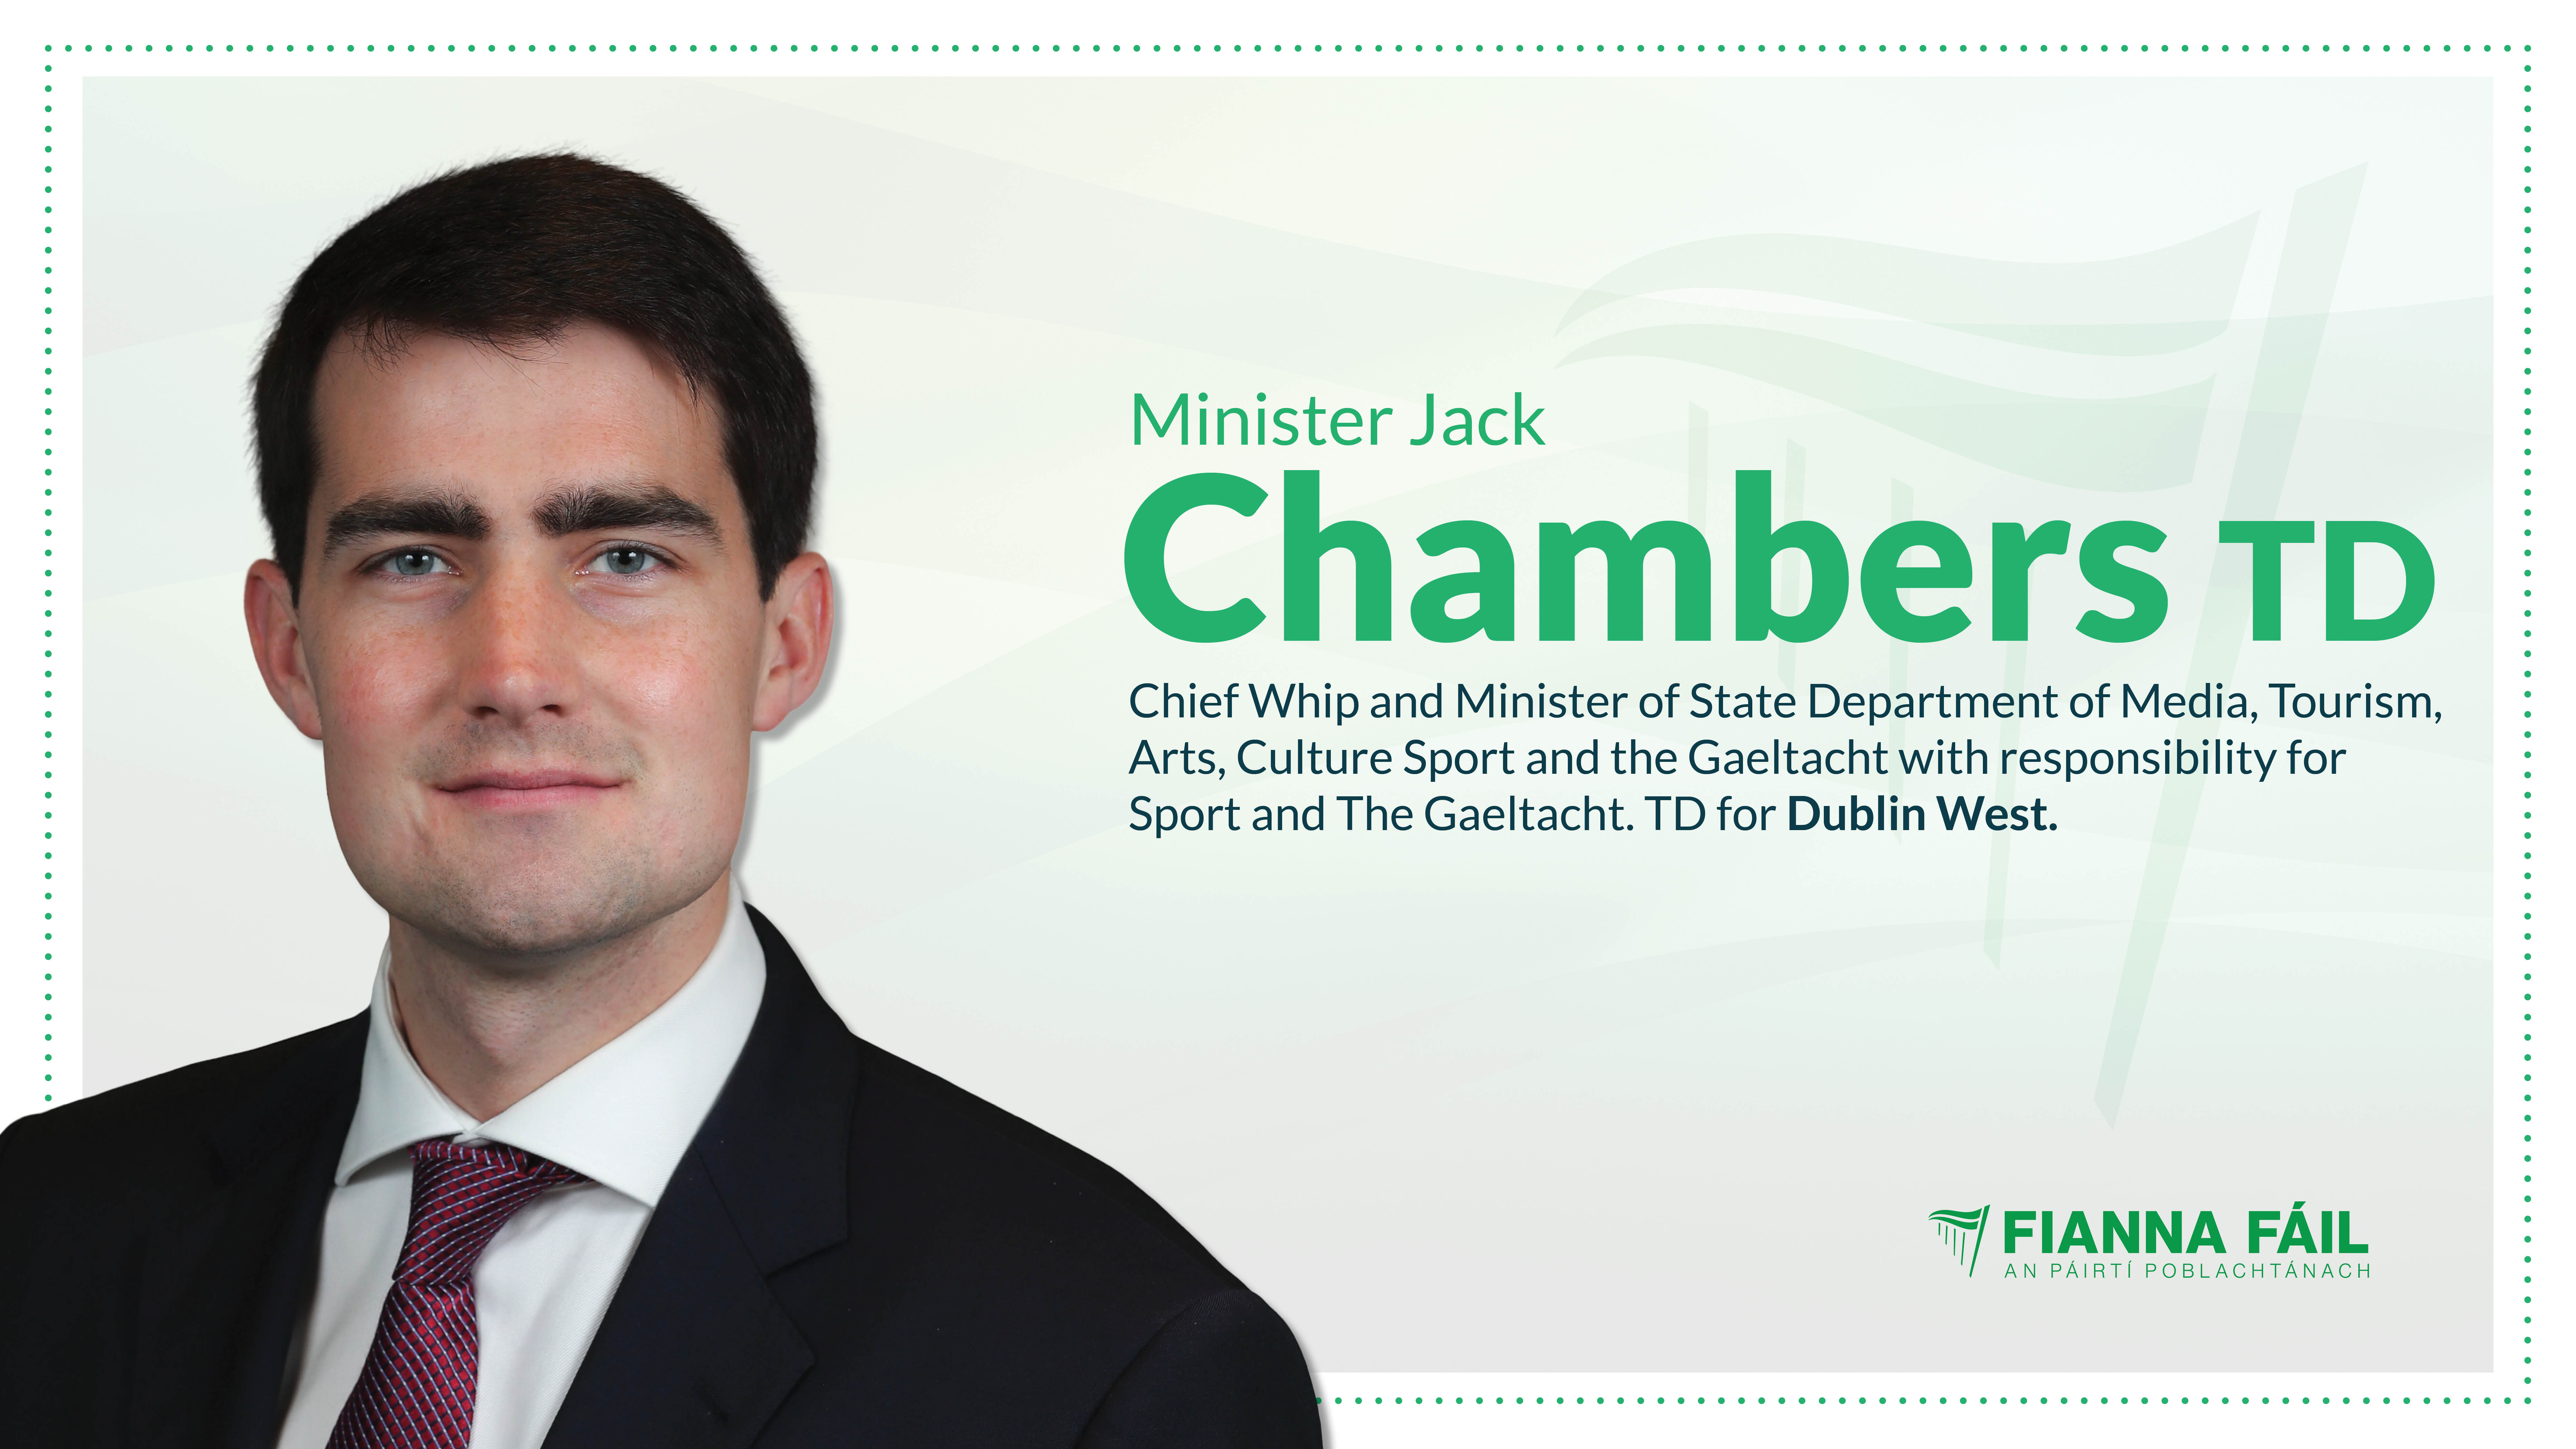 Summer 2022 Legislation Programme published by Government Chief Whip Jack Chambers